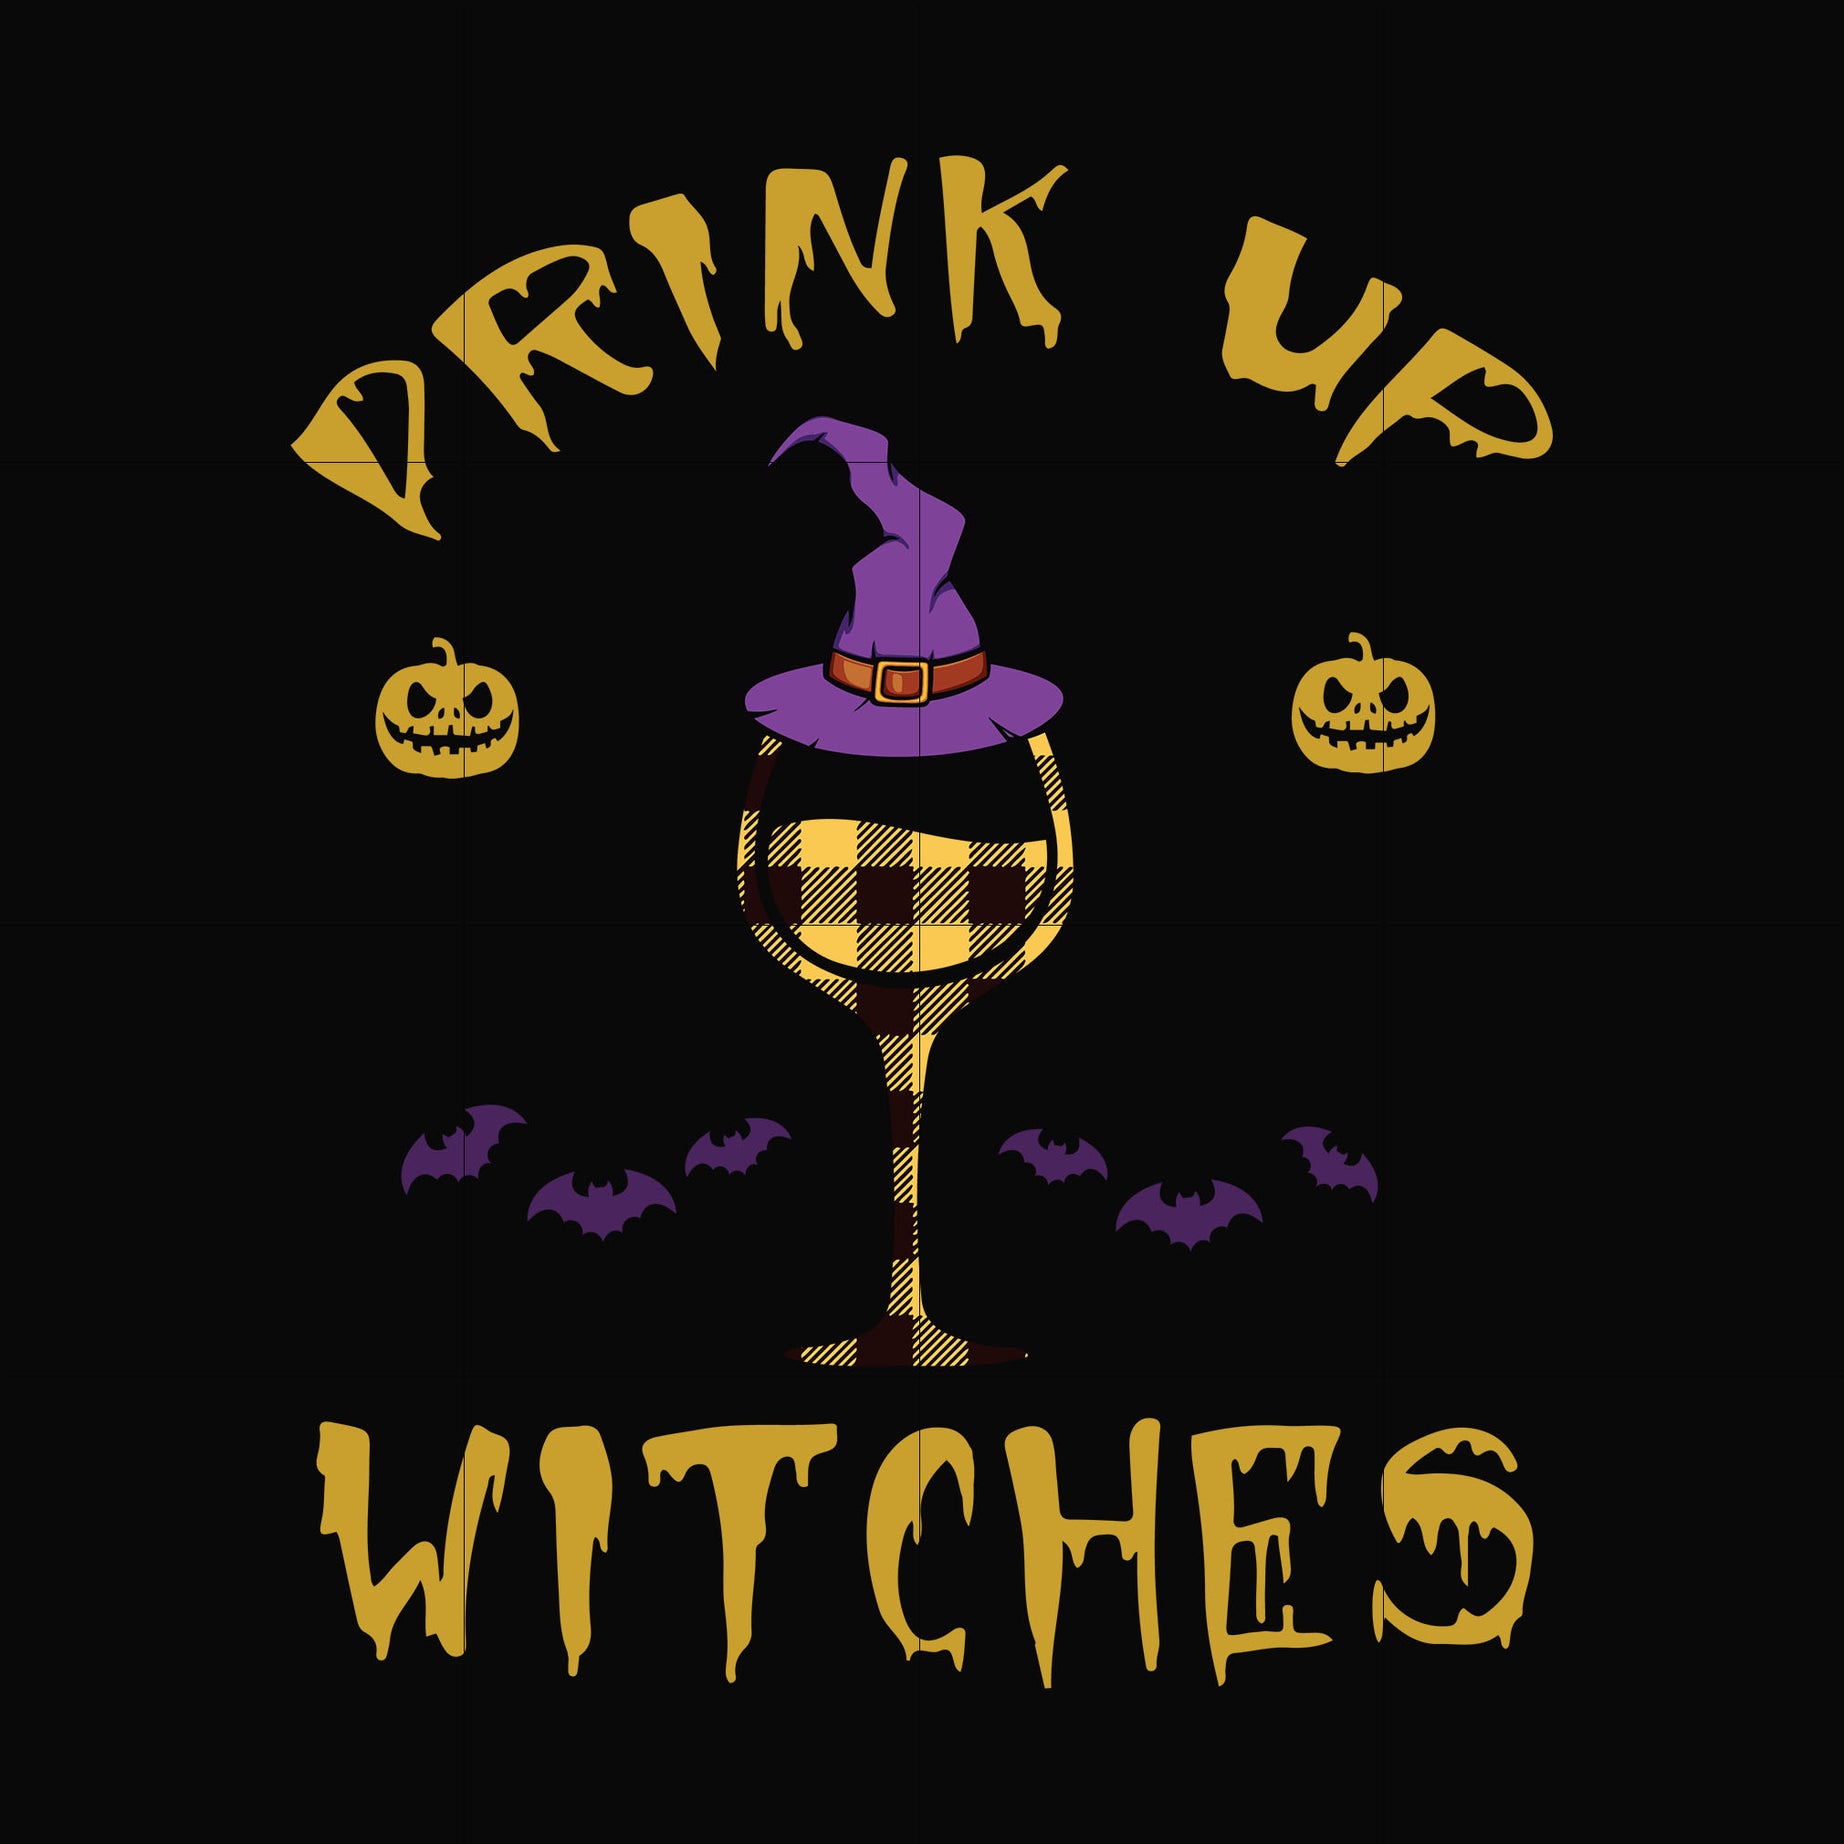 Drink up witches svg, png, dxf, eps digital file HLW2107217